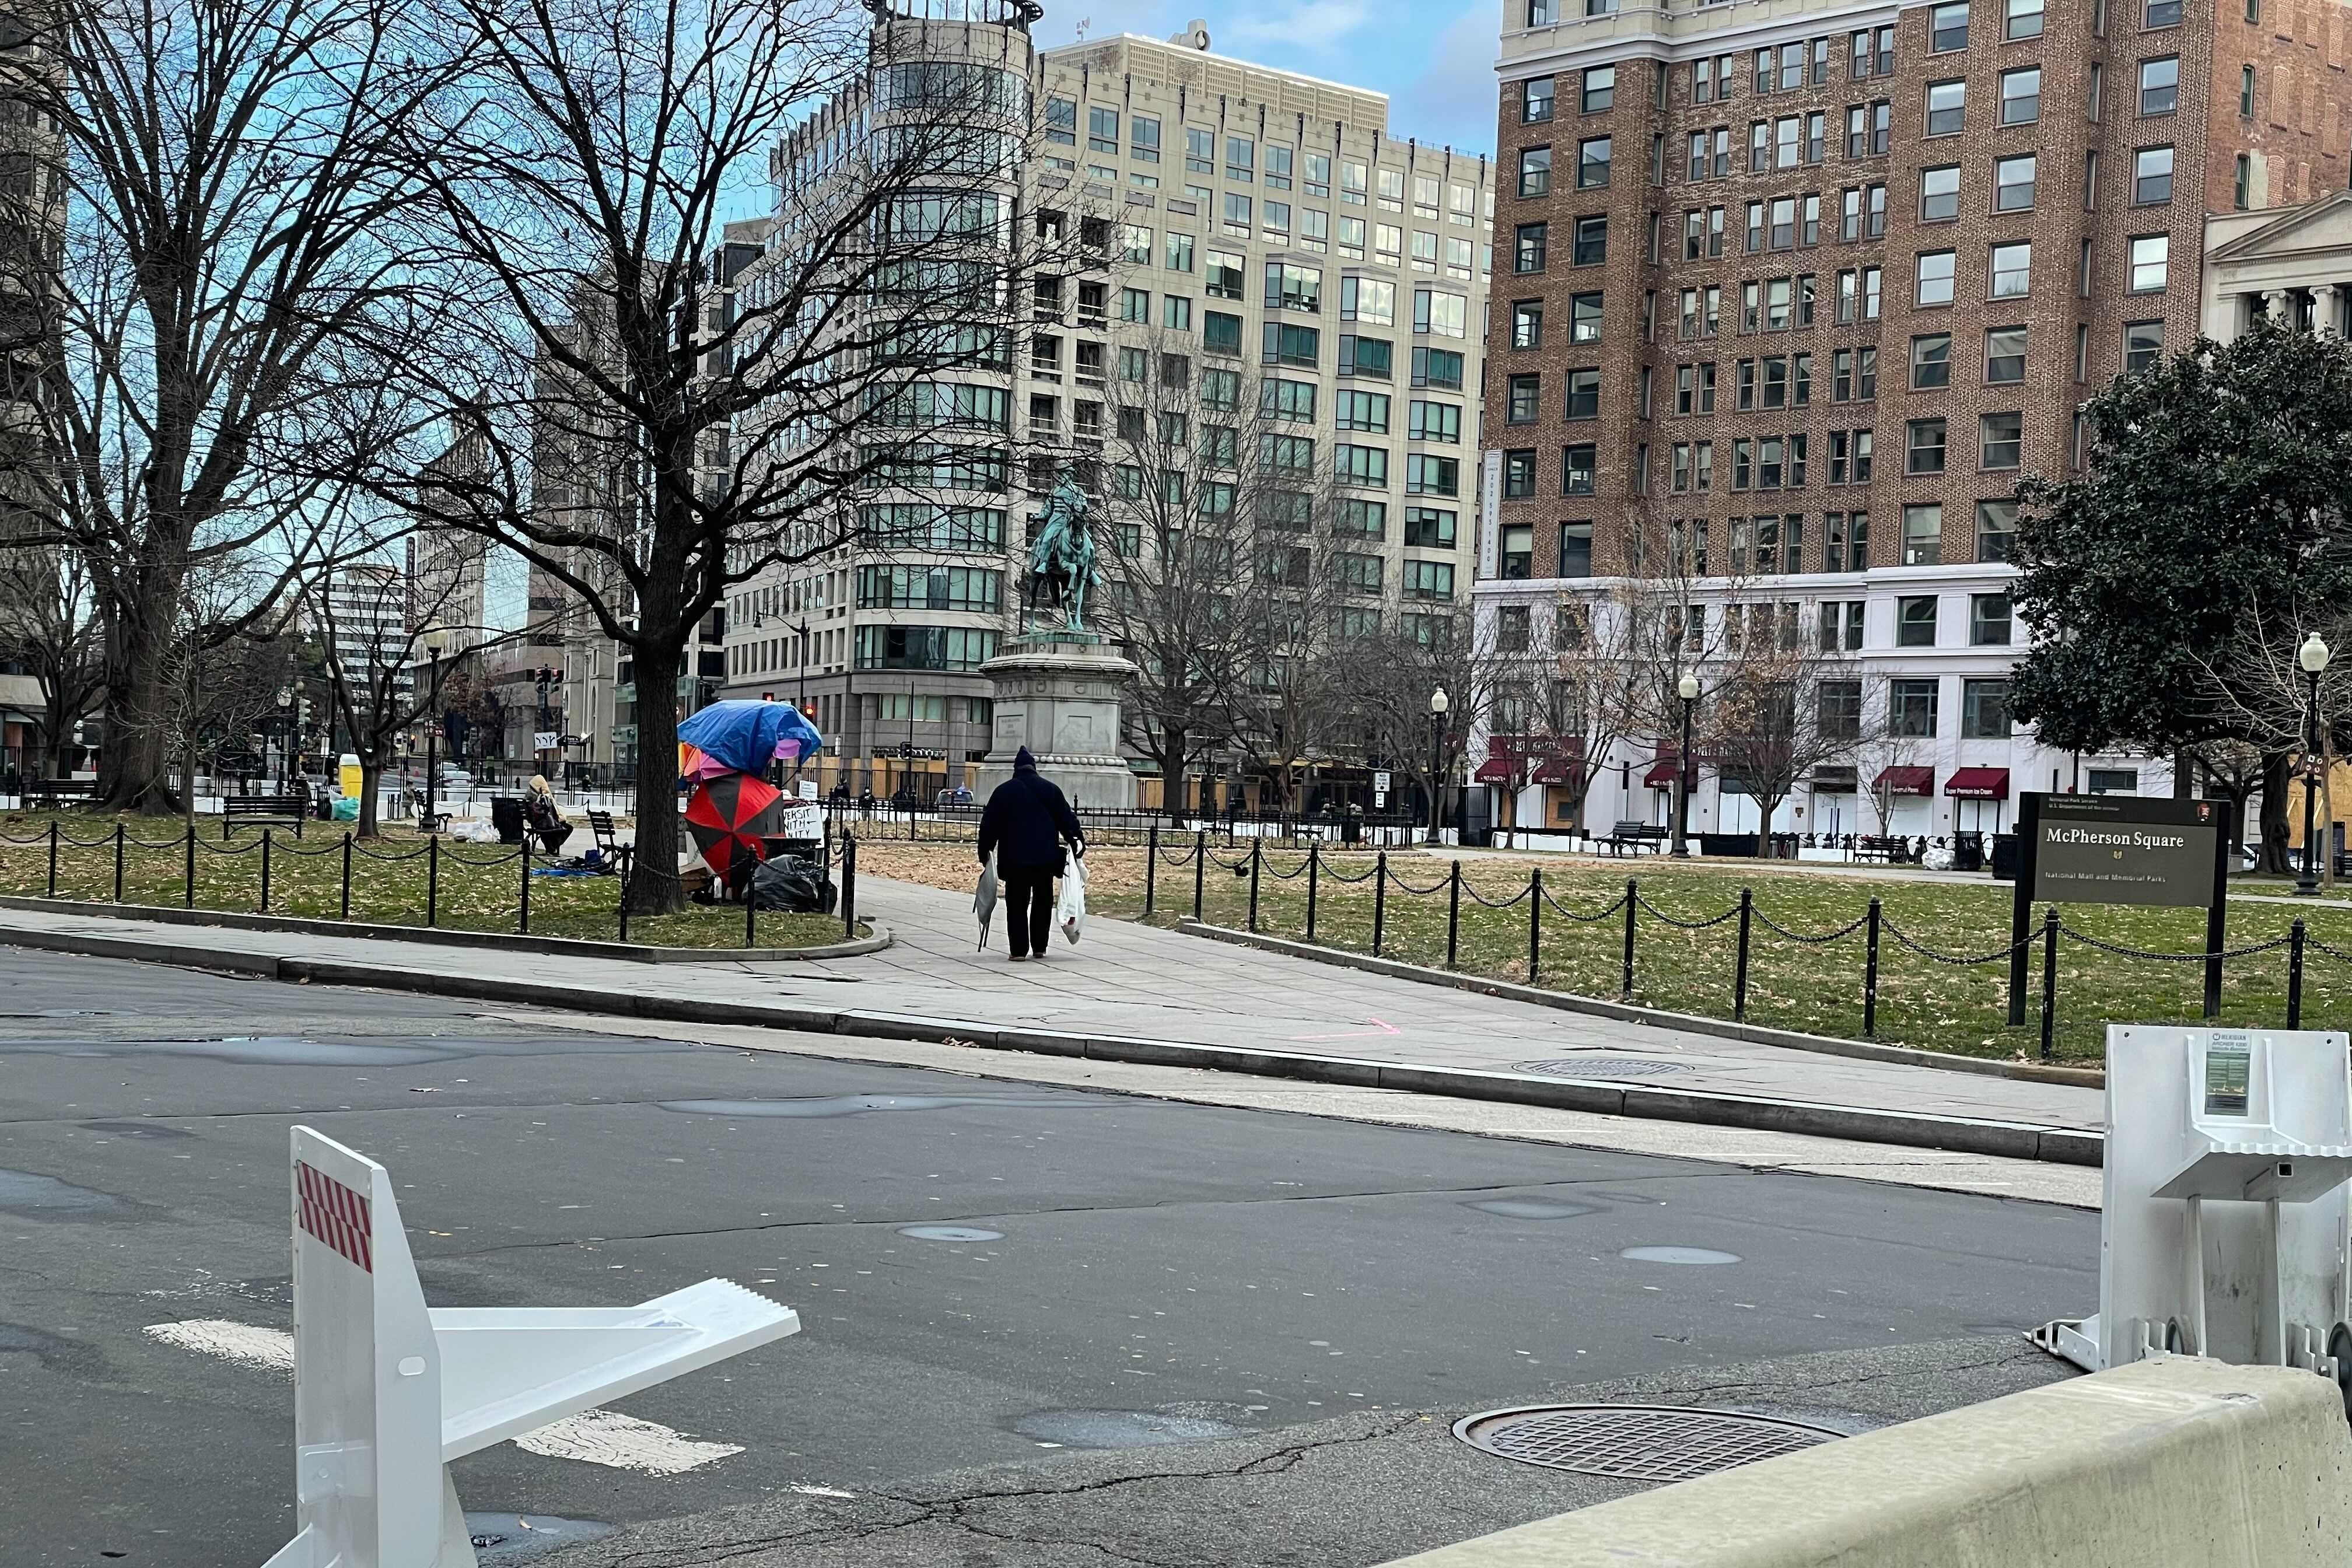 A lone Trump supporter walks off in the distance in D.C.